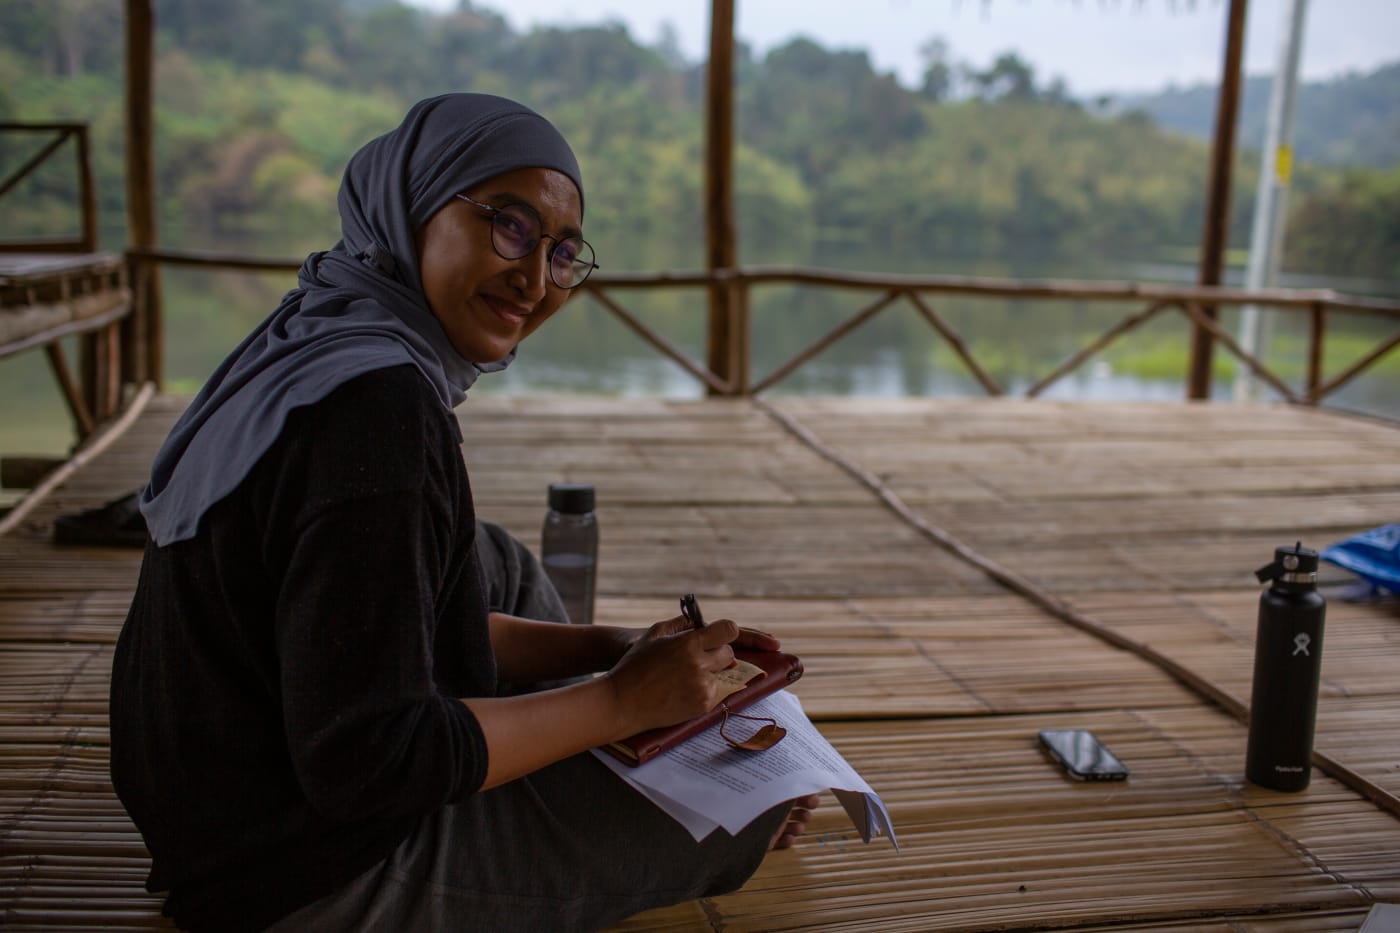 Senior Community Engagement and Education Officer Umi sits on a wooden deck, writing on a notebook. She has turned to face the camera and is smiling.